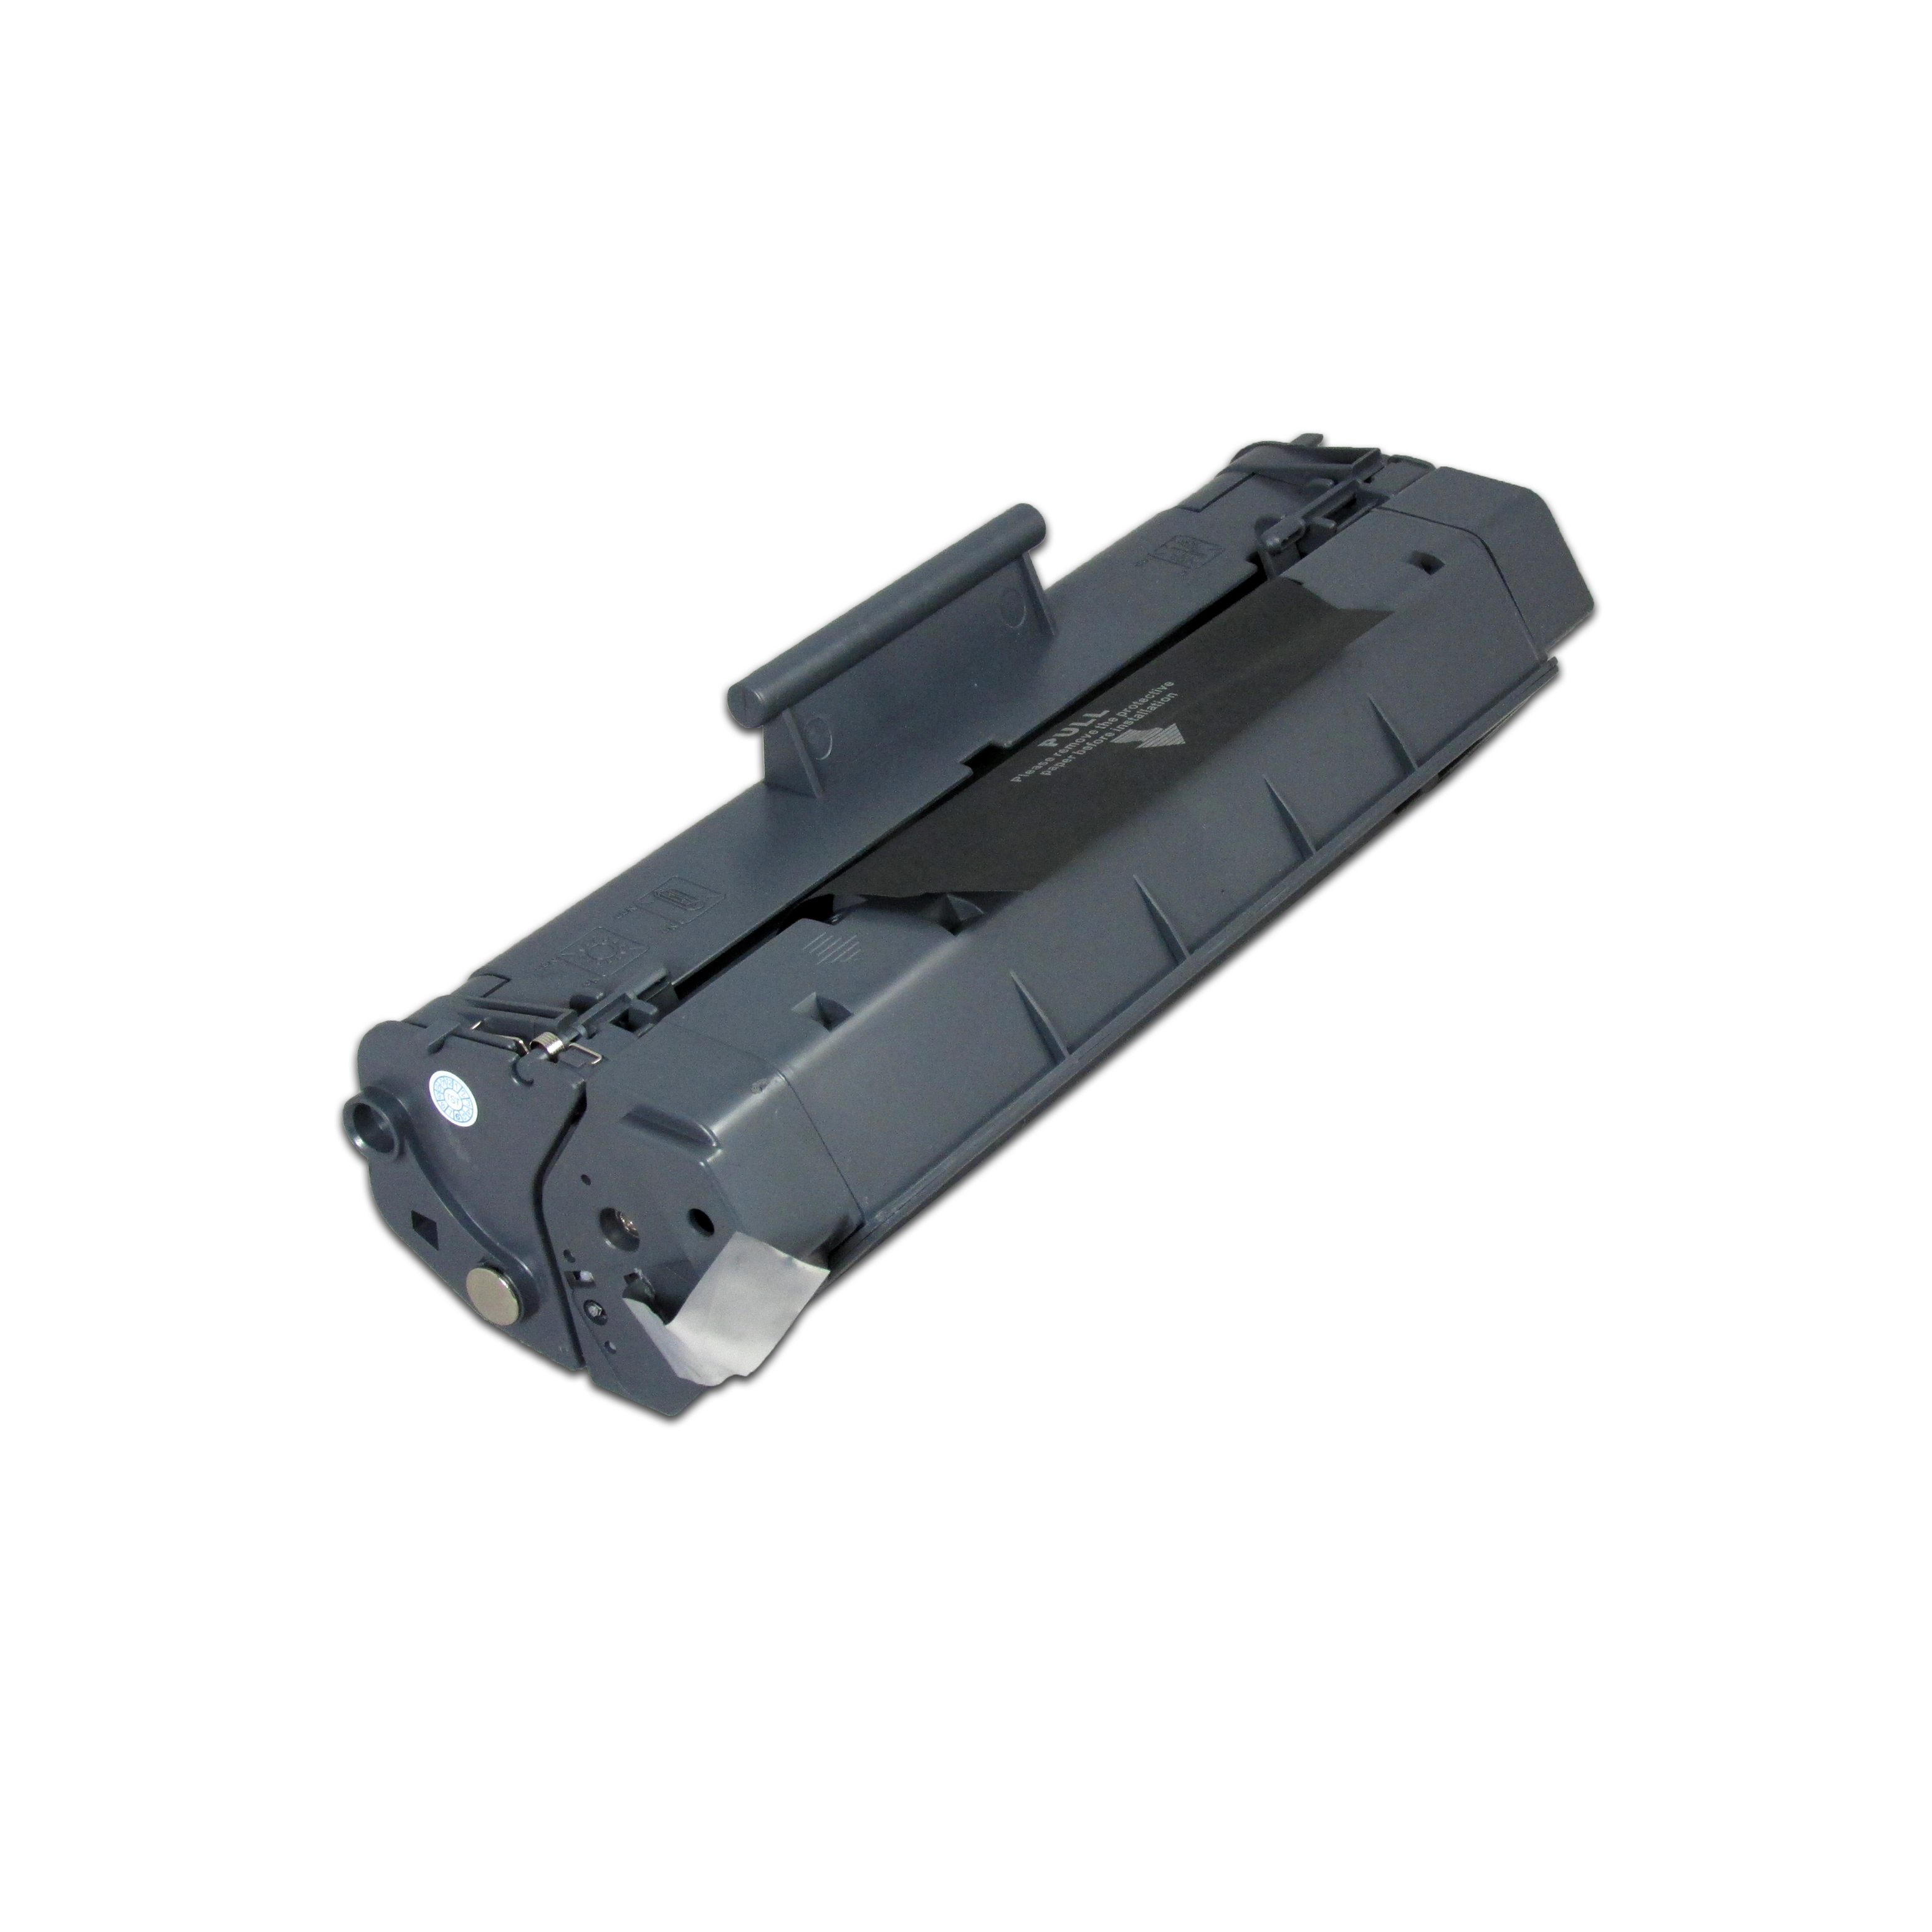 C4092A toner cartridge Use For 1100/1100A/3200